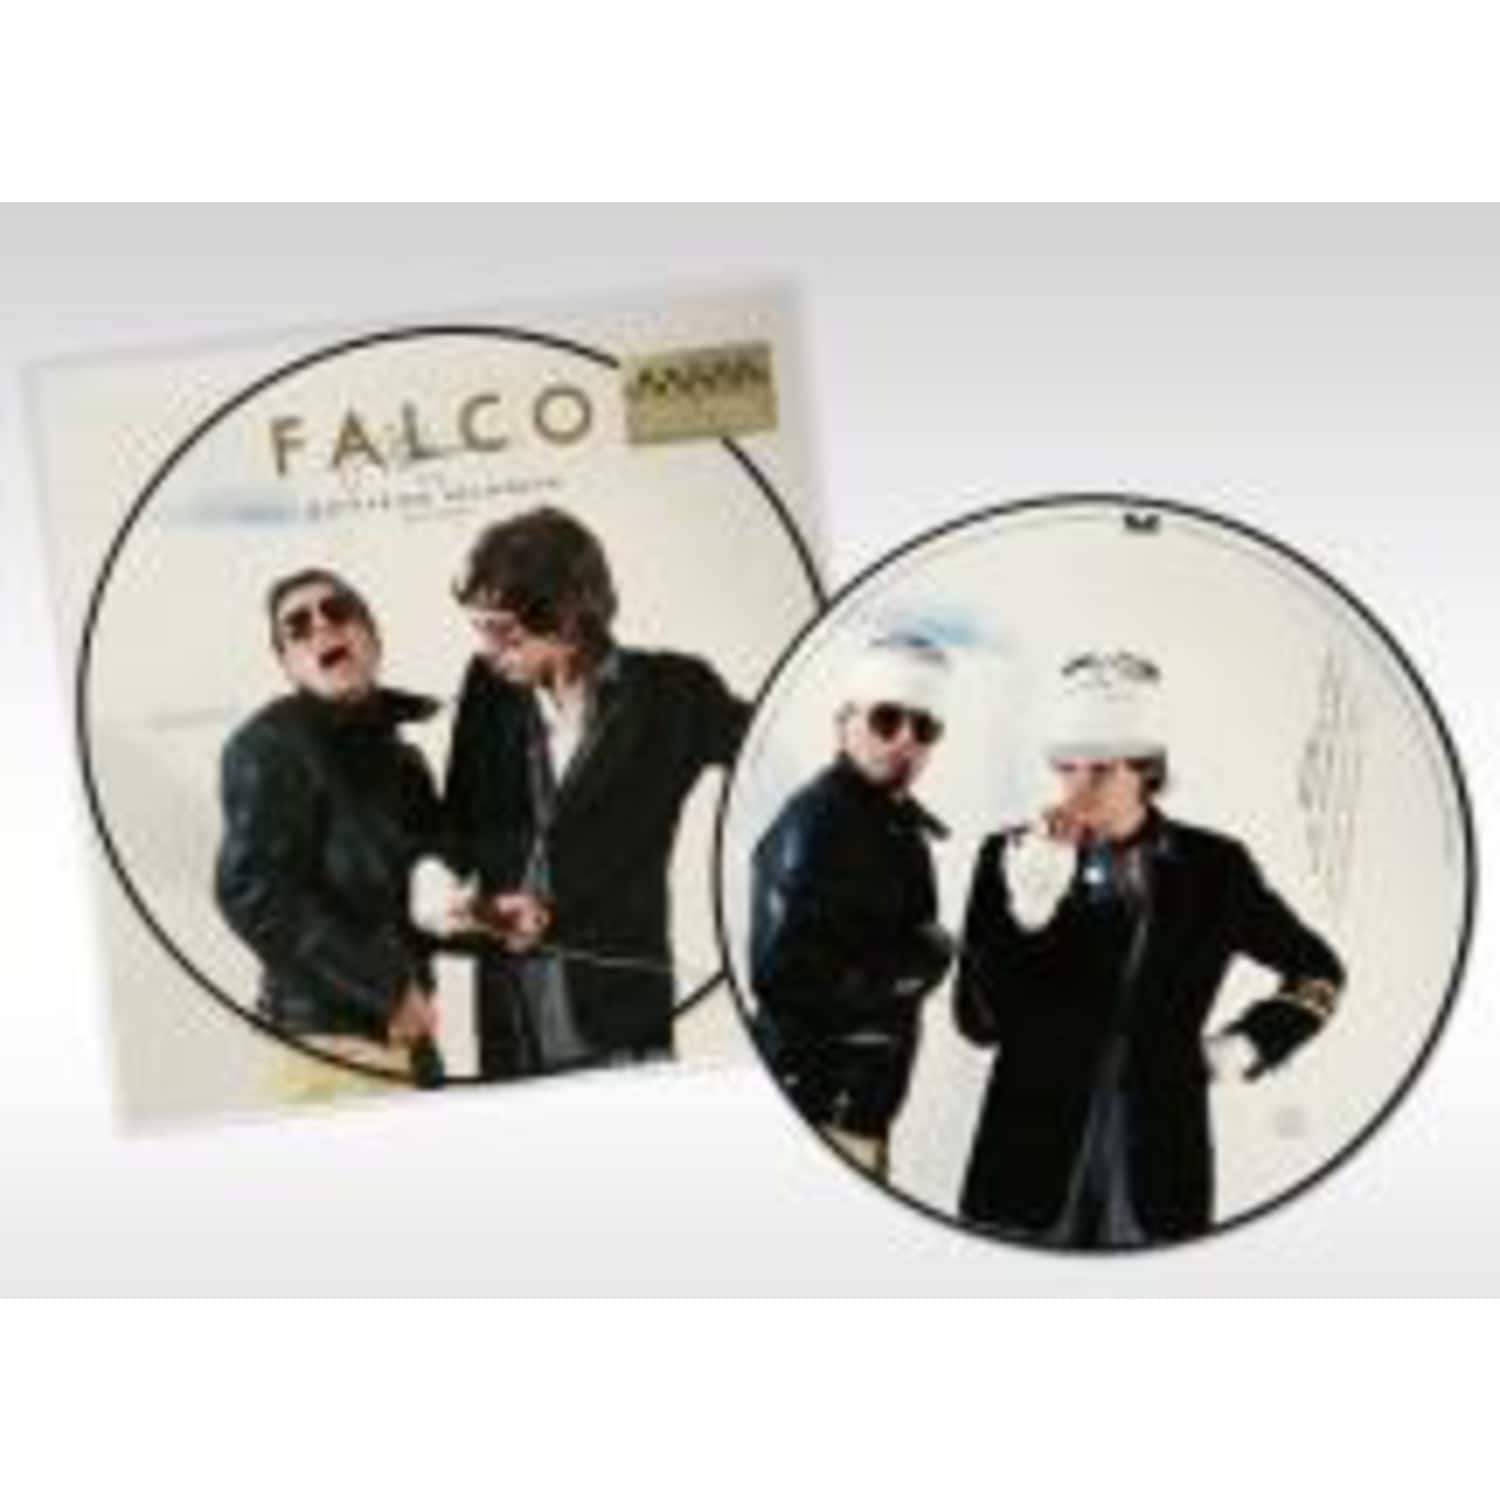 Falco - JUNGE ROEMER - HELNWEIN PICTURE DISC 